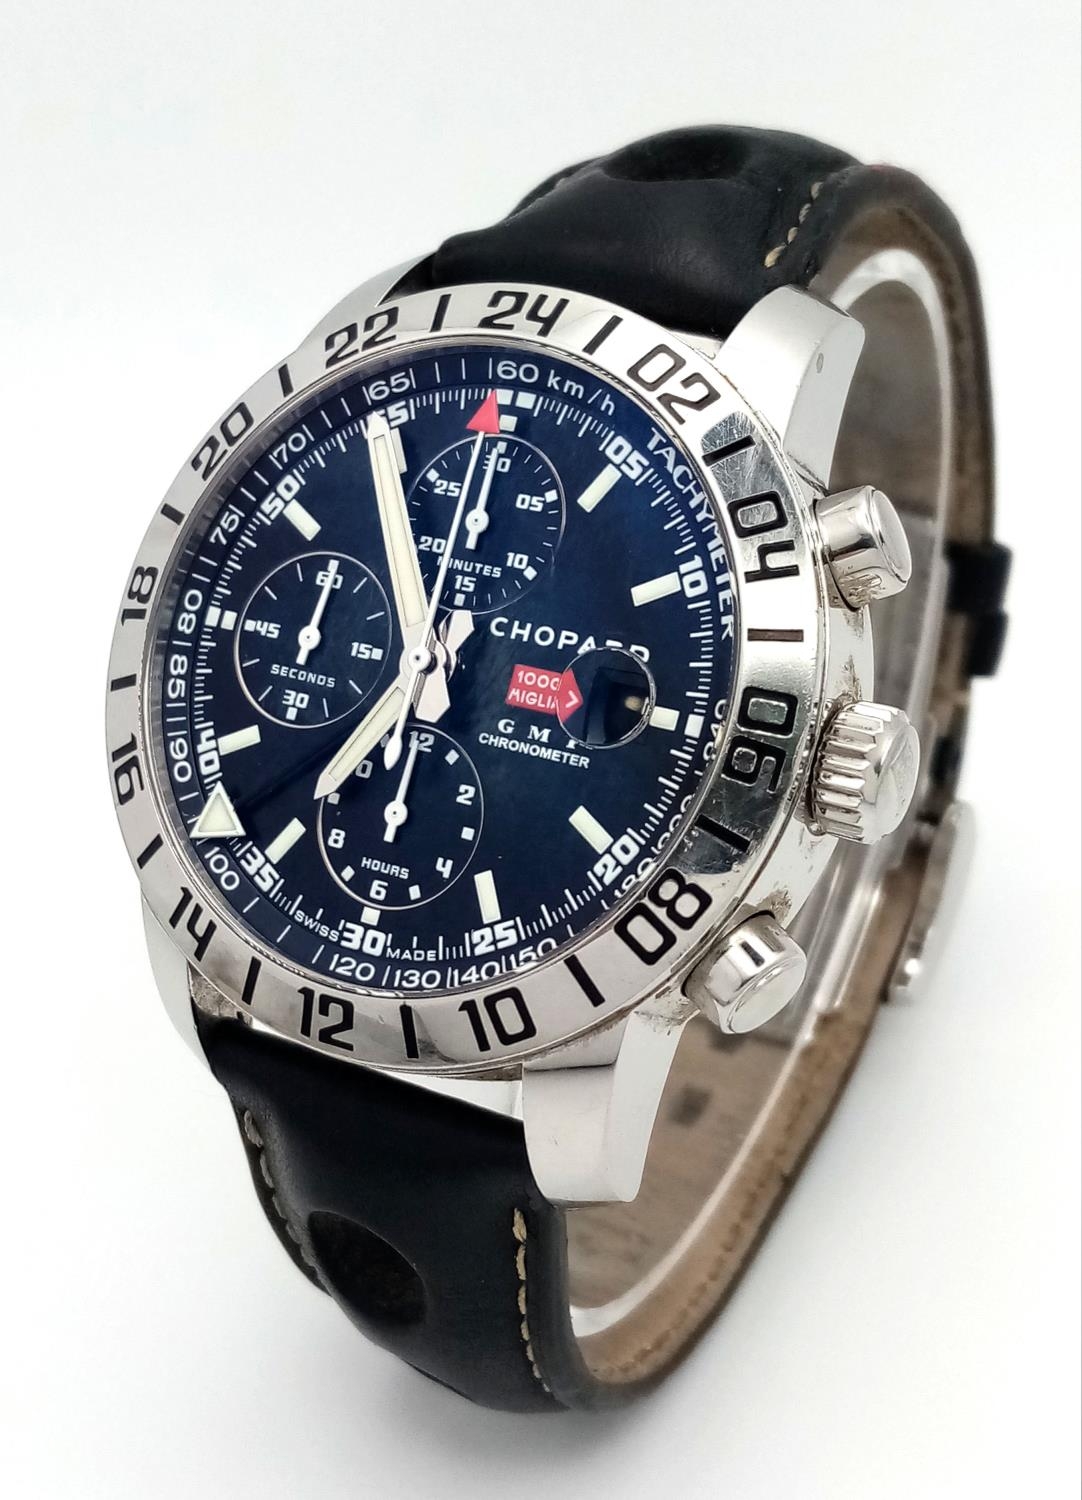 A Chopard Mille Miglia Automatic Gents Watch. Black leather strap. Stainless steel case - 42mm.